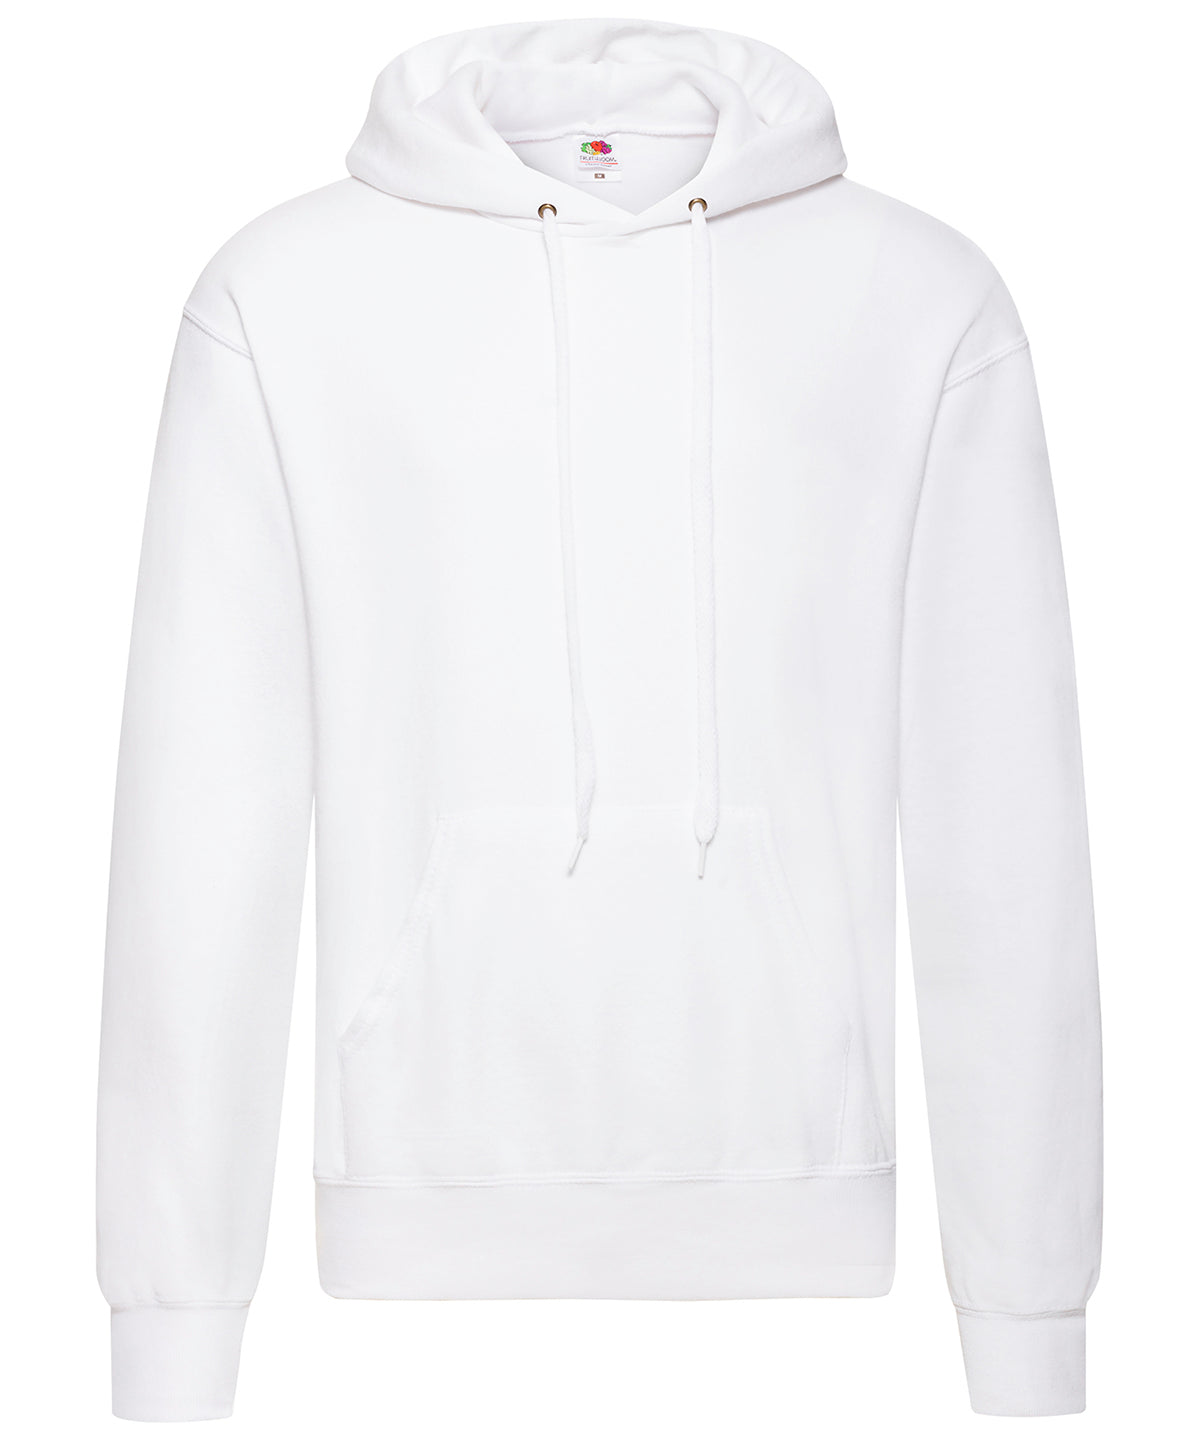 White*† - Classic 80/20 hooded sweatshirt Hoodies Fruit of the Loom Home of the hoodie, Hoodies, Must Haves, New Colours for 2023, New Sizes for 2021, Plus Sizes, Price Lock, Raladeal - Recently Added, Sports & Leisure, Workwear Schoolwear Centres